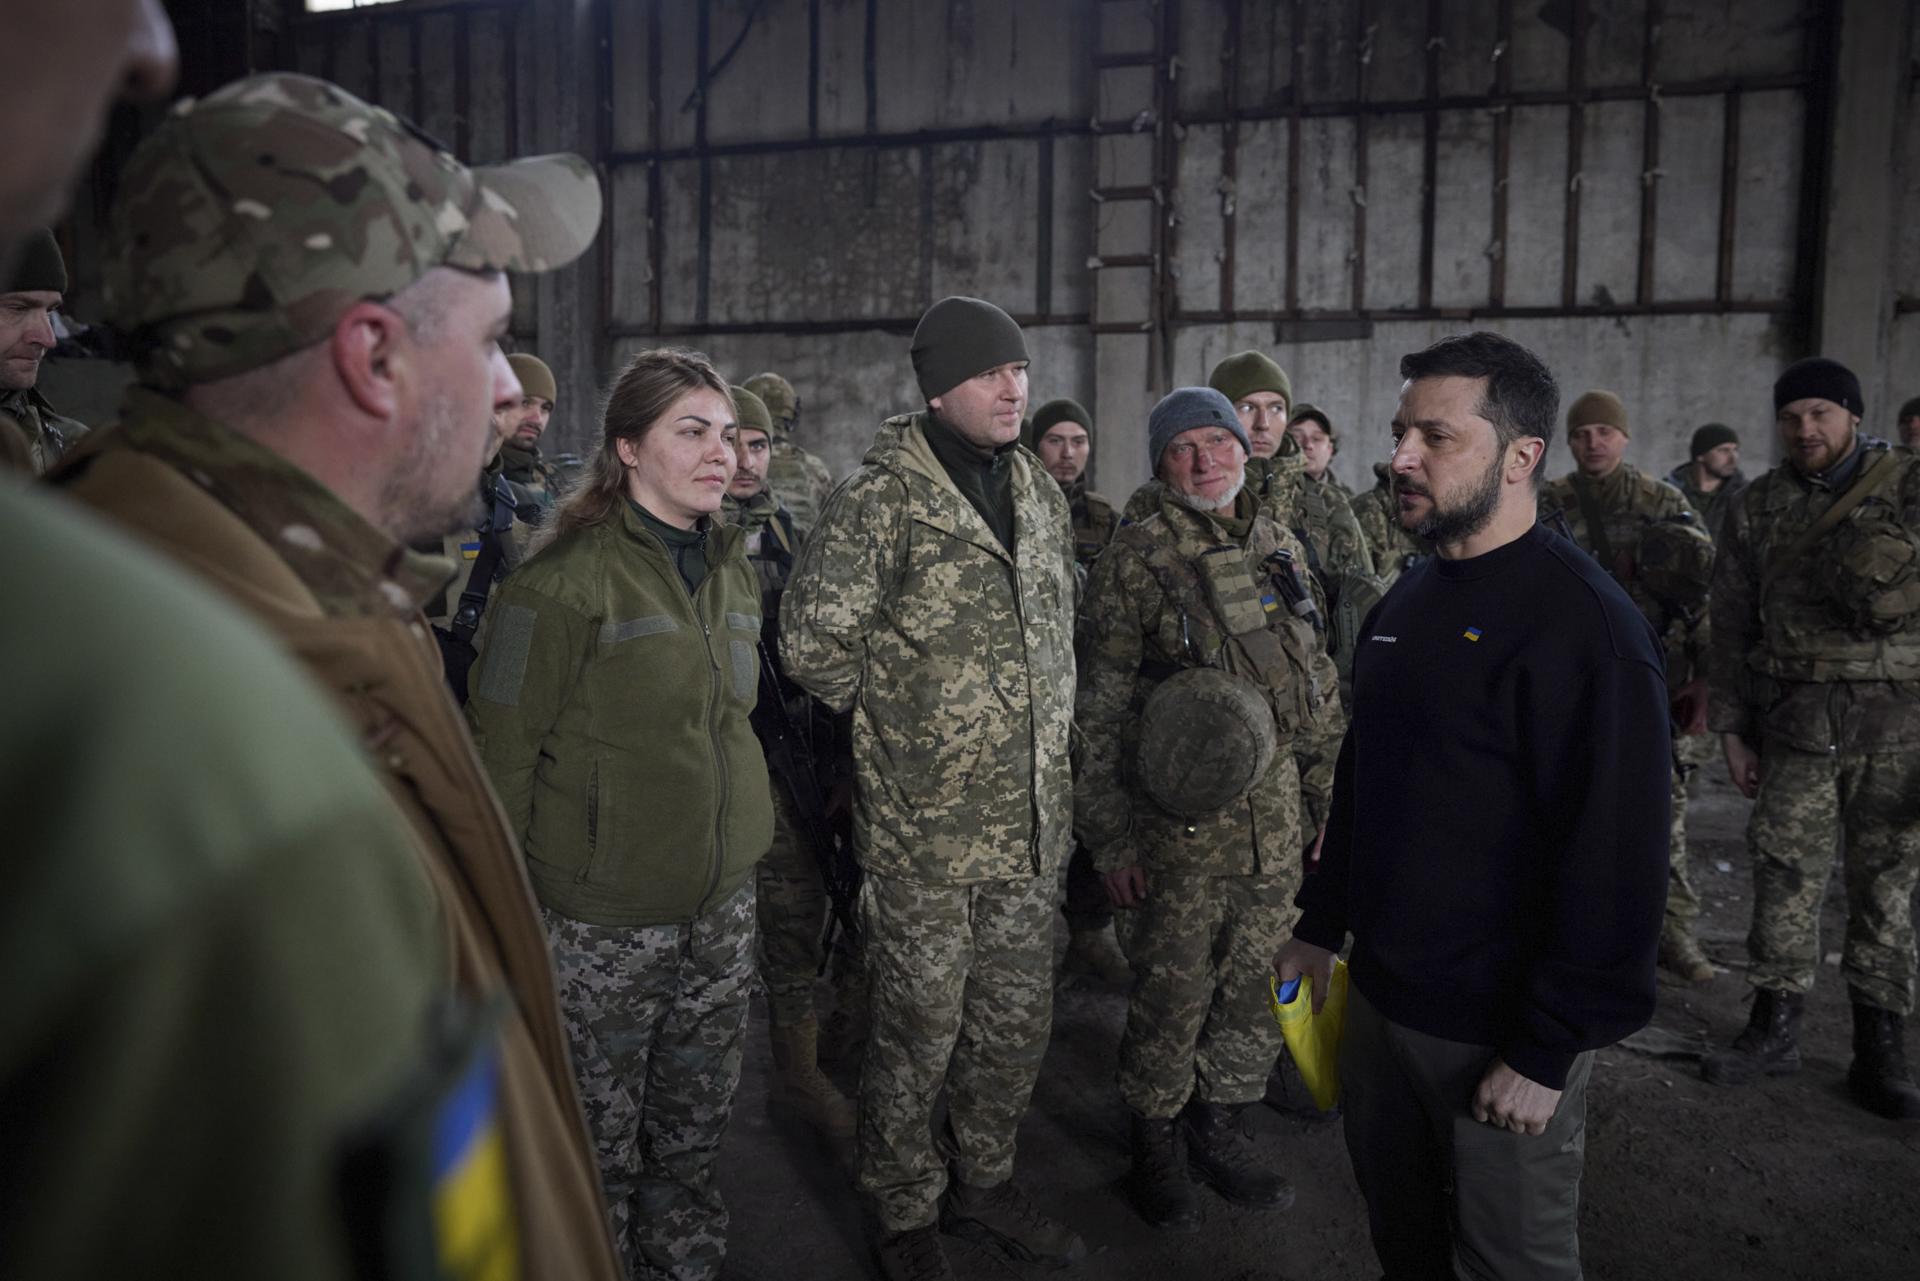 A handout photo made available by the Ukrainian Presidential Press Service shows Ukrainian President Volodymyr Zelensky (R) visiting the advanced positions of the Ukrainian military in the Bakhmut direction, during a working trip to the Donetsk region, at an undisclosed location in Ukraine, 22 March 2023, amid the Russian invasion of the country. EFE/EPA/PRESIDENTIAL PRESS SERVICE